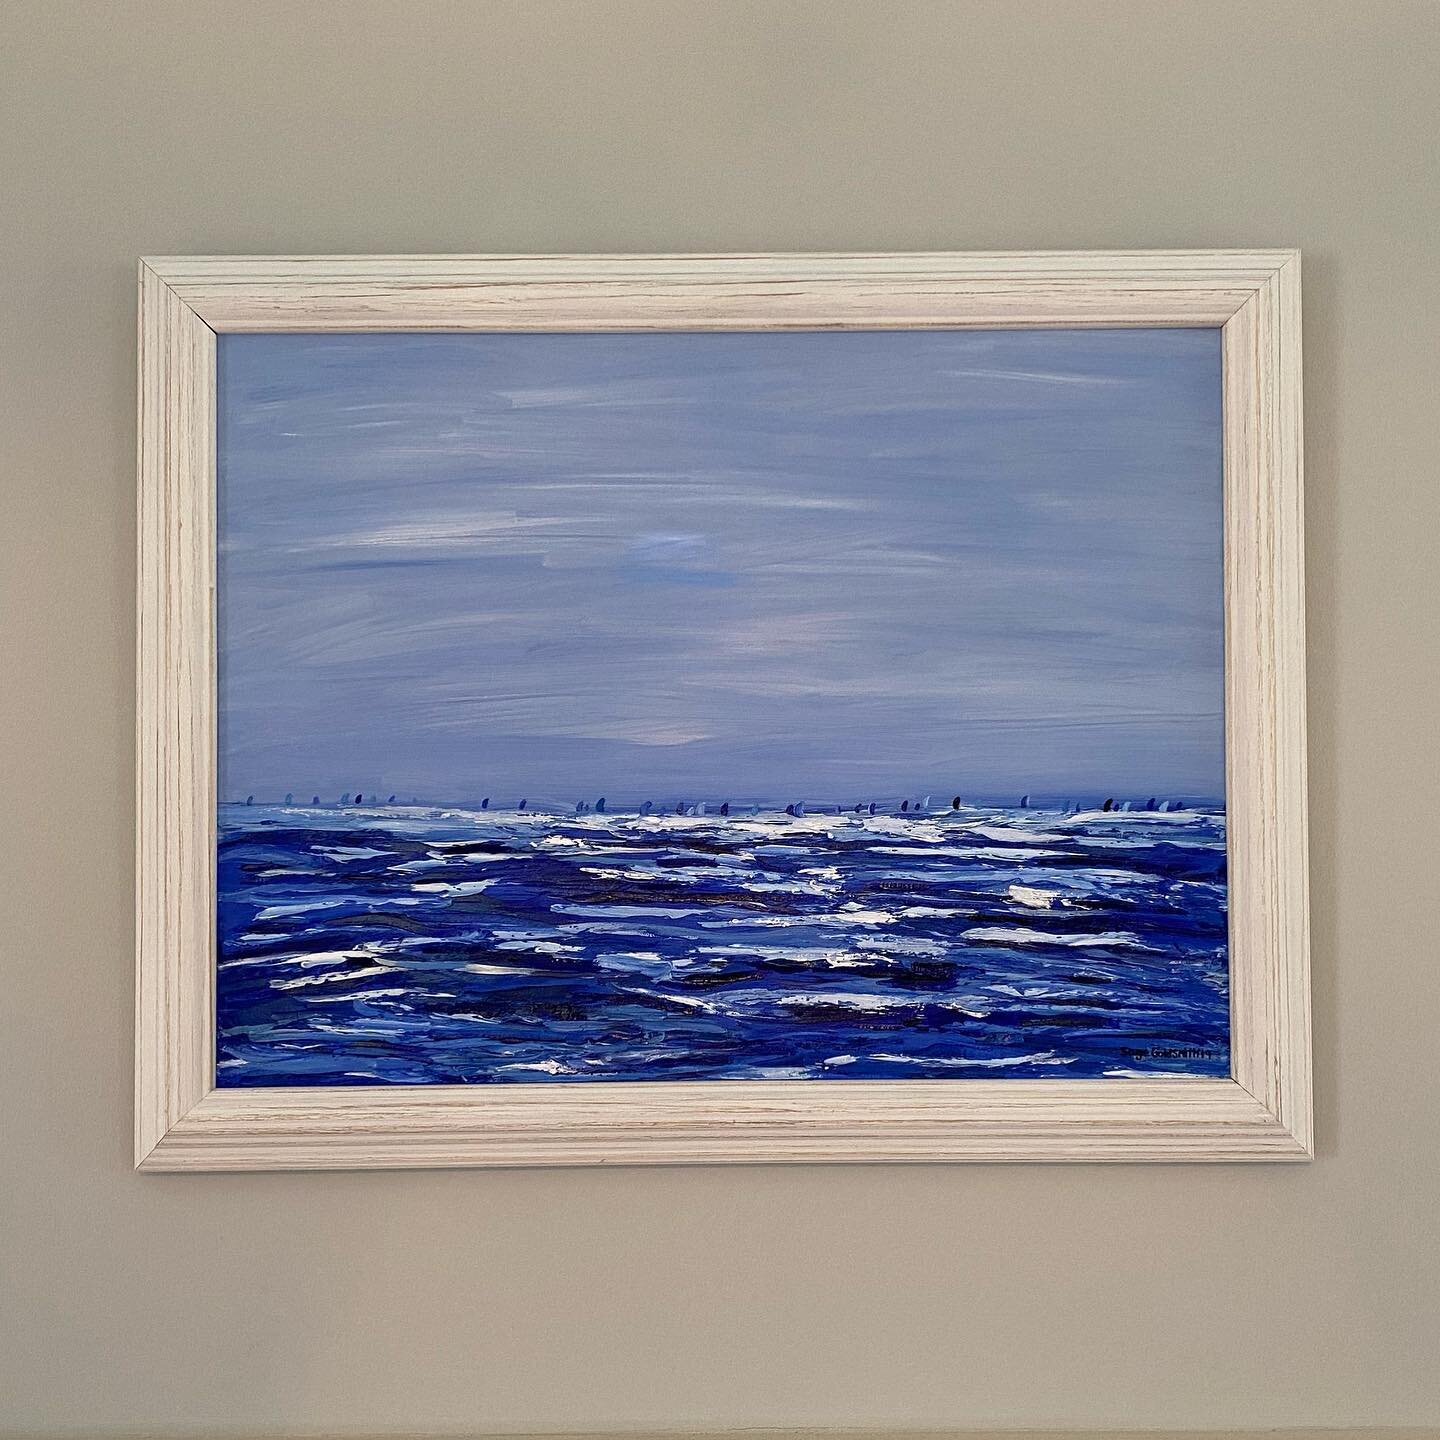 &quot;Shades of Blue&quot; (18&quot; x 24&quot;) oil on canvas is: SOLD 🔴 👏🏻 Purchase a one of a kind oil painting, and be done with holiday shopping! 🎄🎨🎁✅ #sagegoldsmithpaintings #oilpainting #creative #create #supportlocalartists #art #seasca